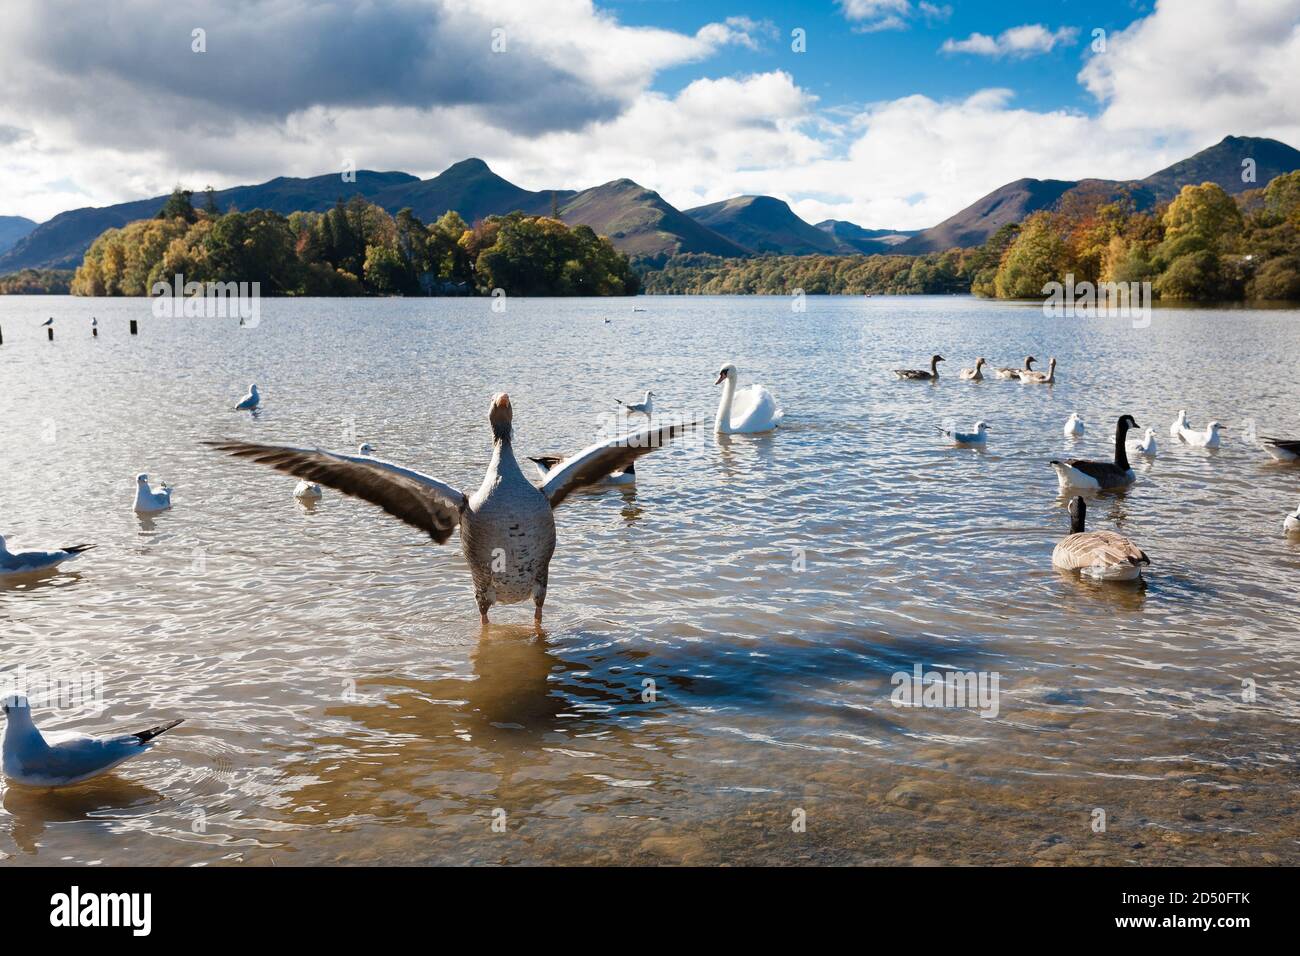 Birds in a tranquil bay on Lake Derwentwater in the English Lake District Stock Photo